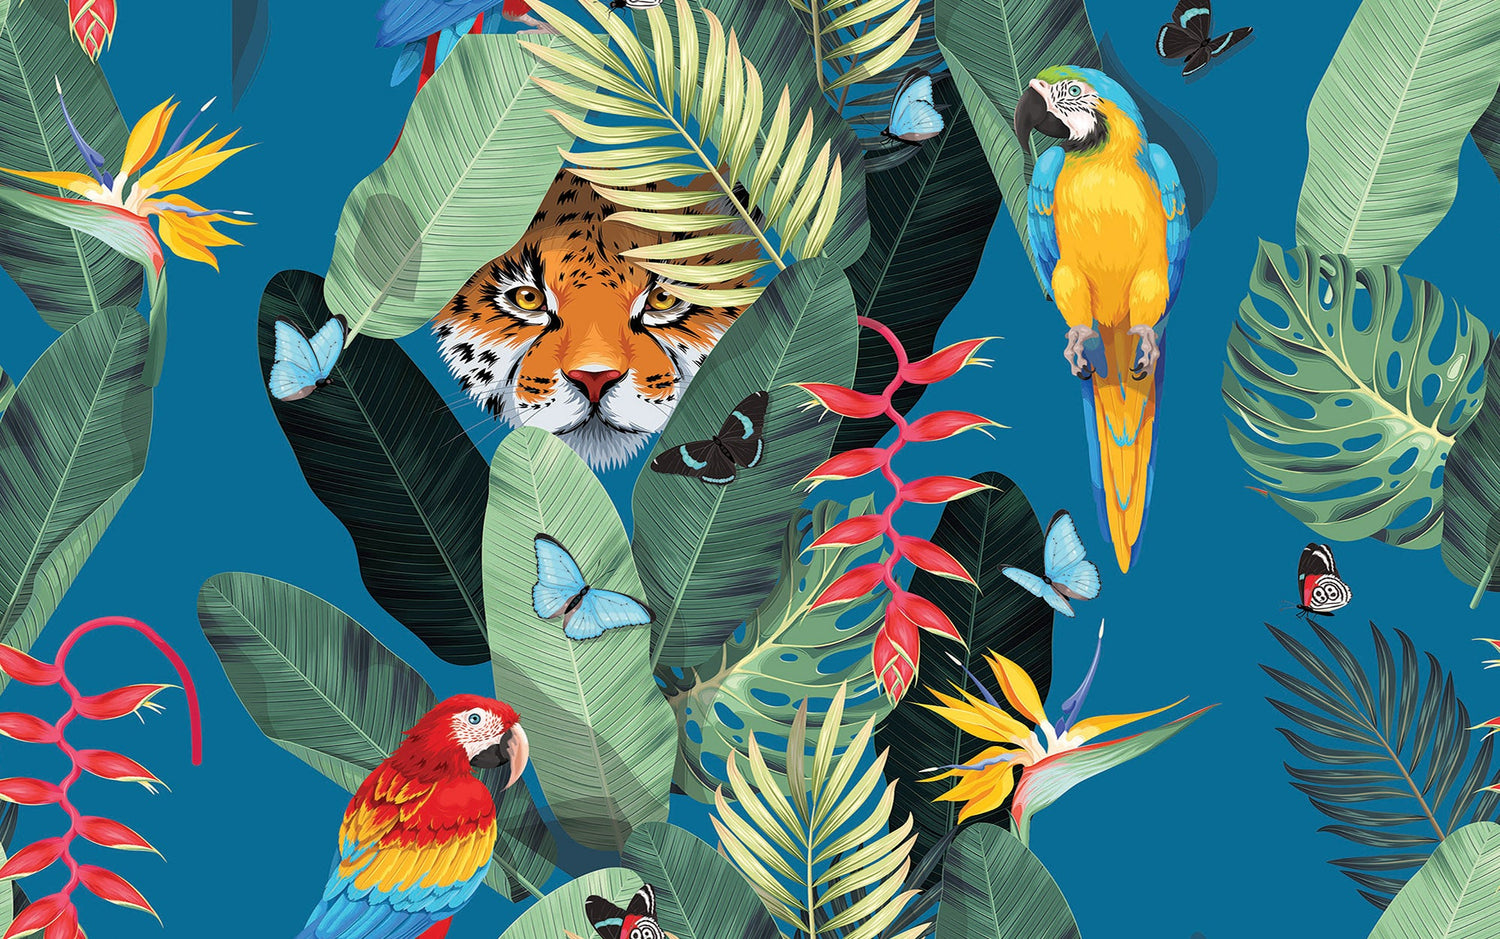 Vibrant tropical jungle mural with a tiger, parrots, butterflies, and lush foliage on a blue background.